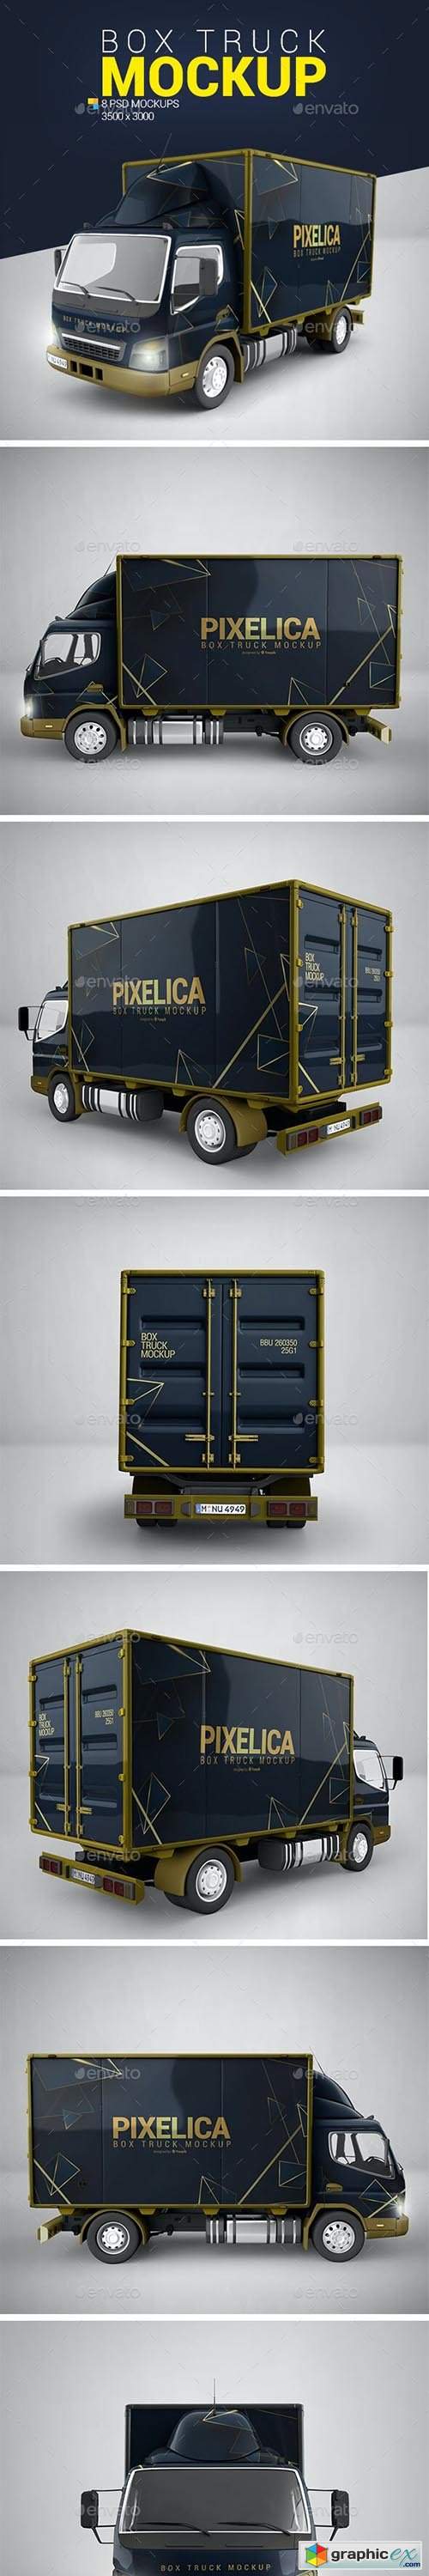 Download Box Truck Mockup » Free Download Vector Stock Image Photoshop Icon